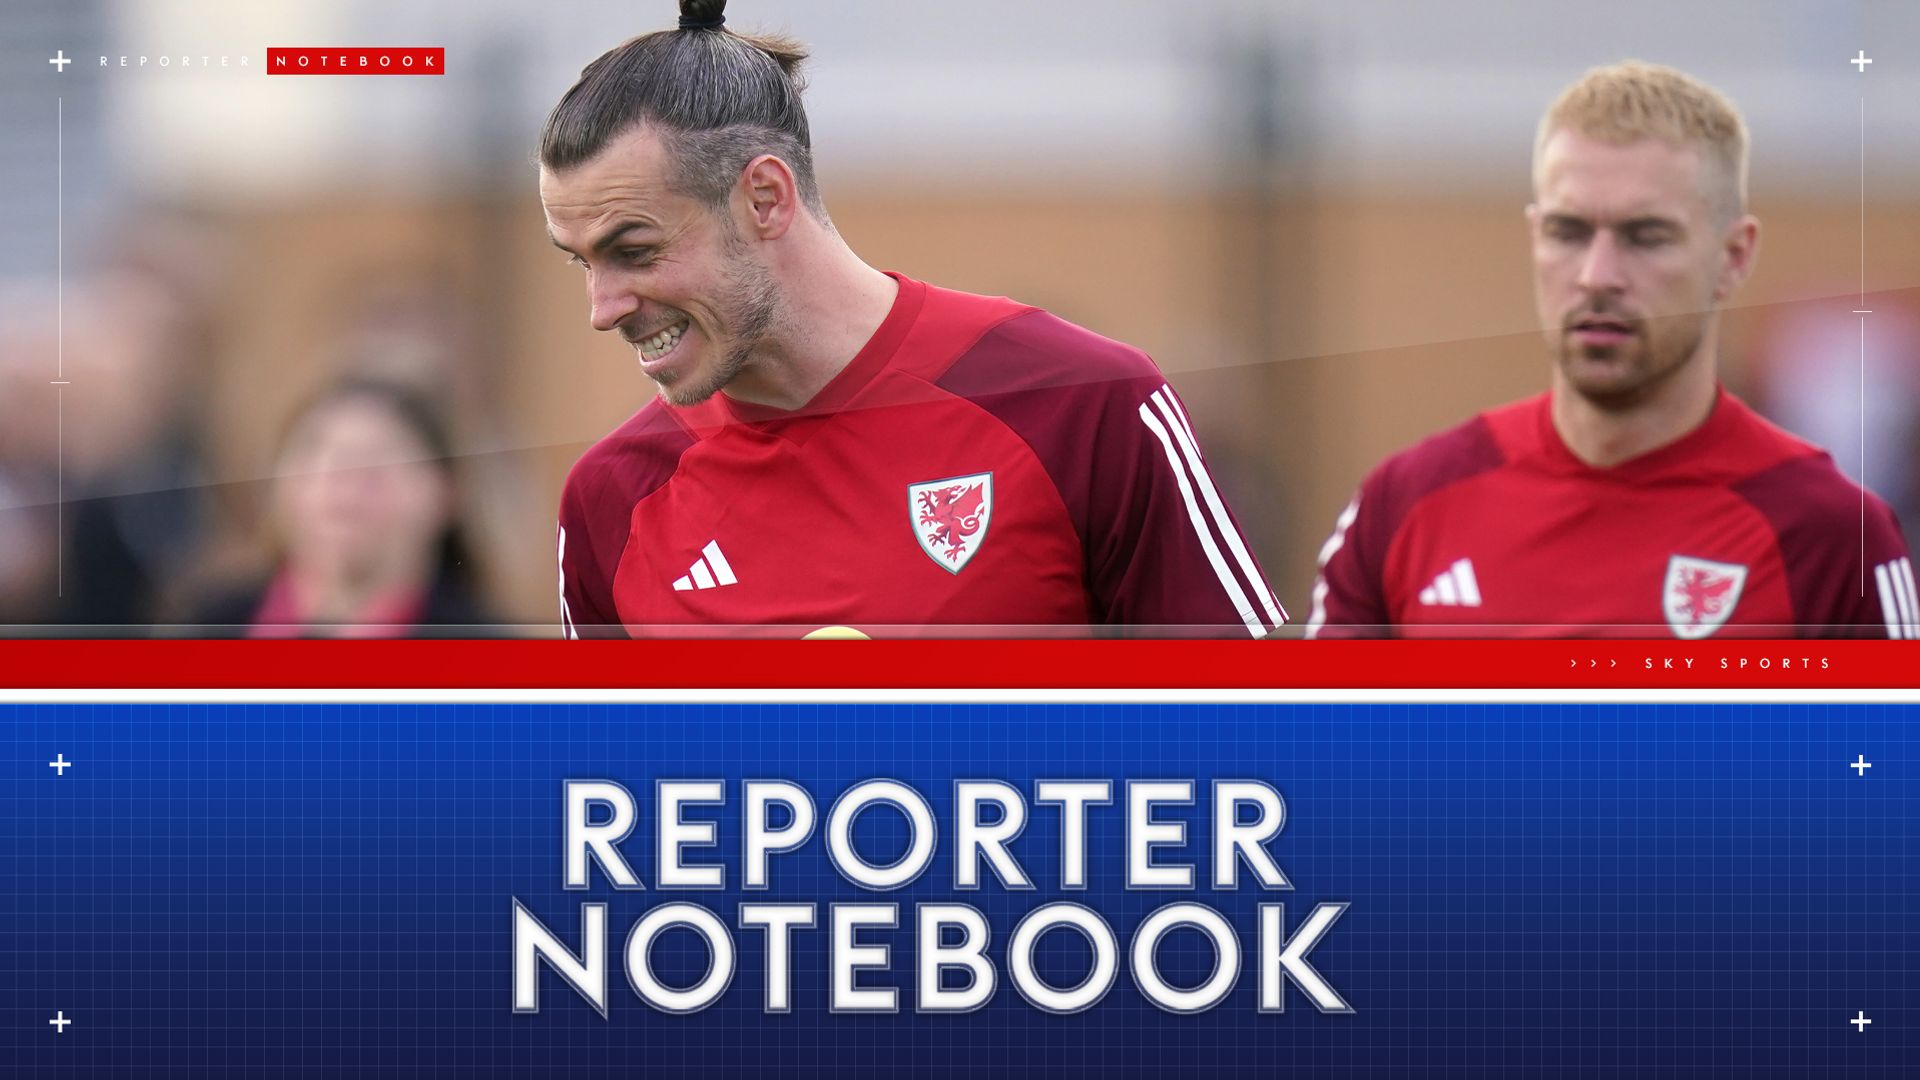 Wales reporter notebook: Does Page do the unthinkable and drop Bale?